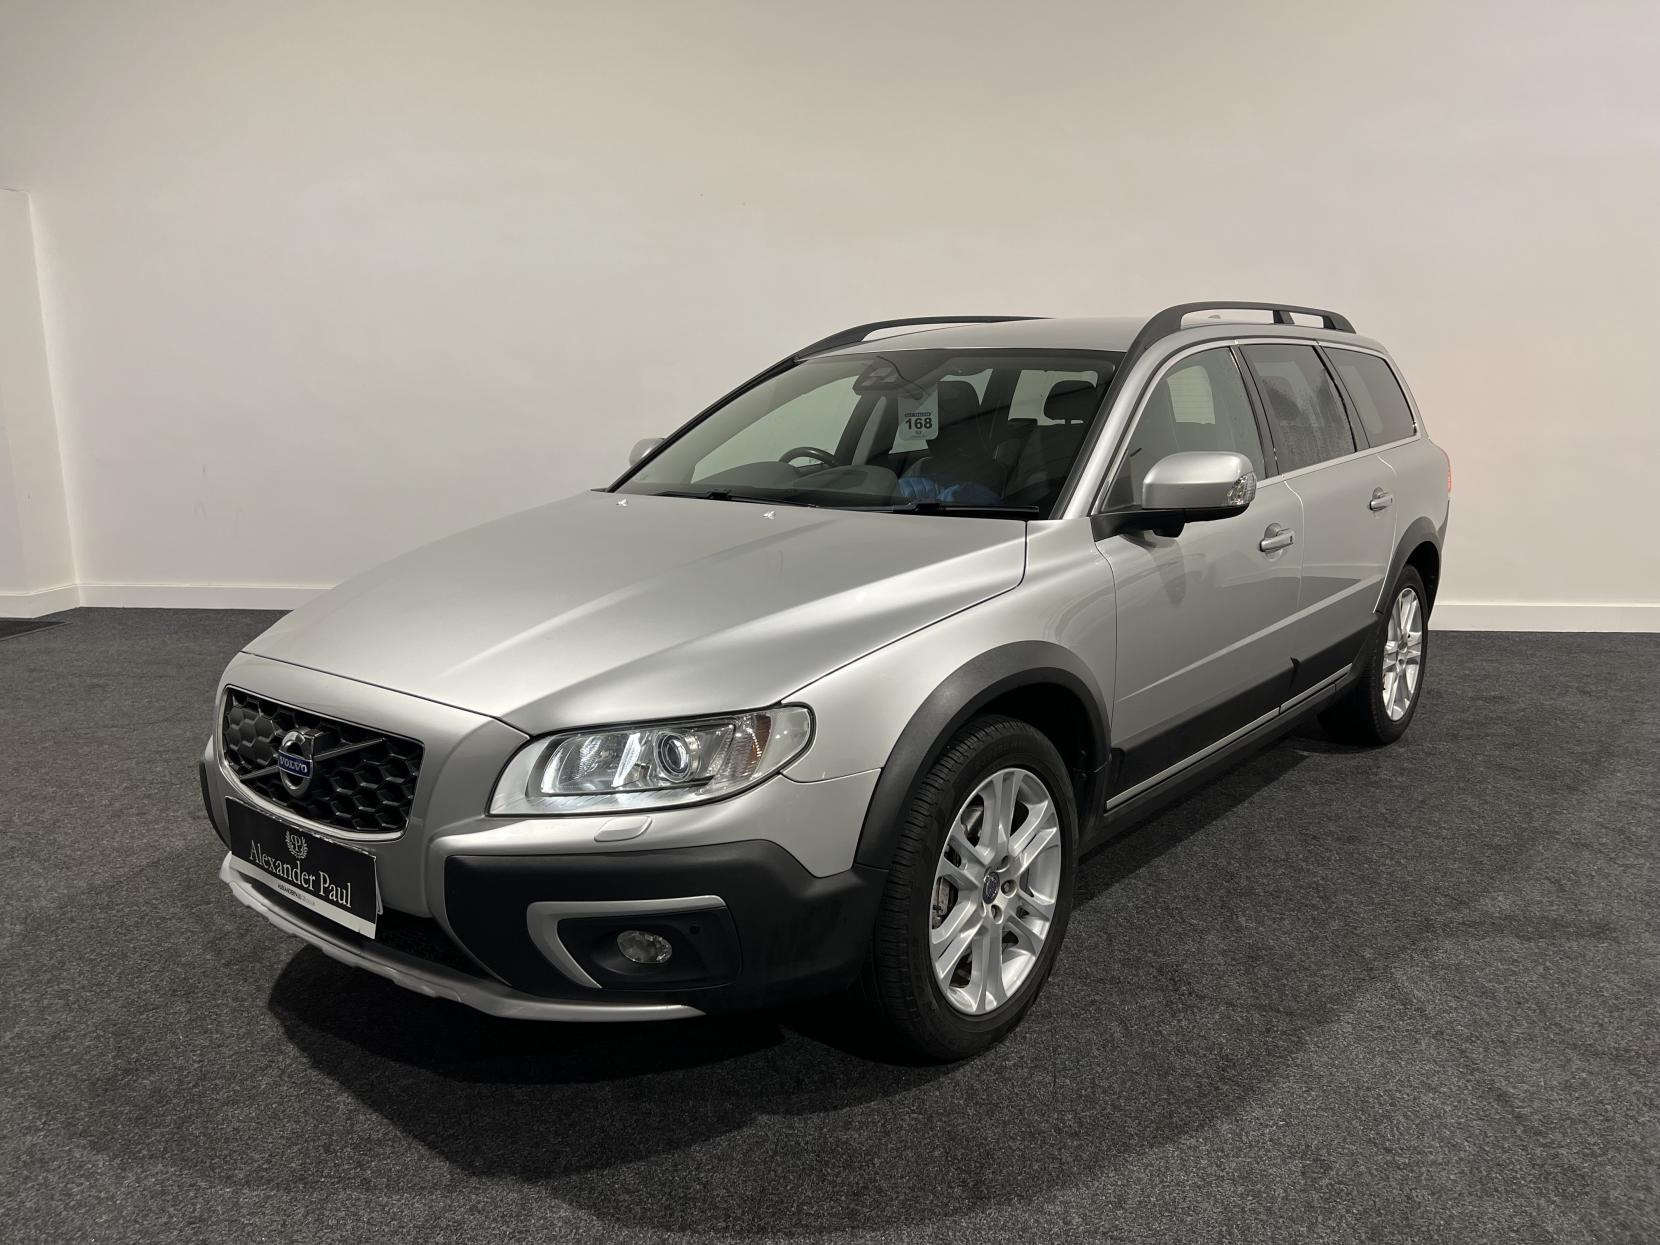 Volvo XC70 2.4 D5 SE Lux Estate 5dr Diesel Geartronic AWD Euro 5 (215 ps)